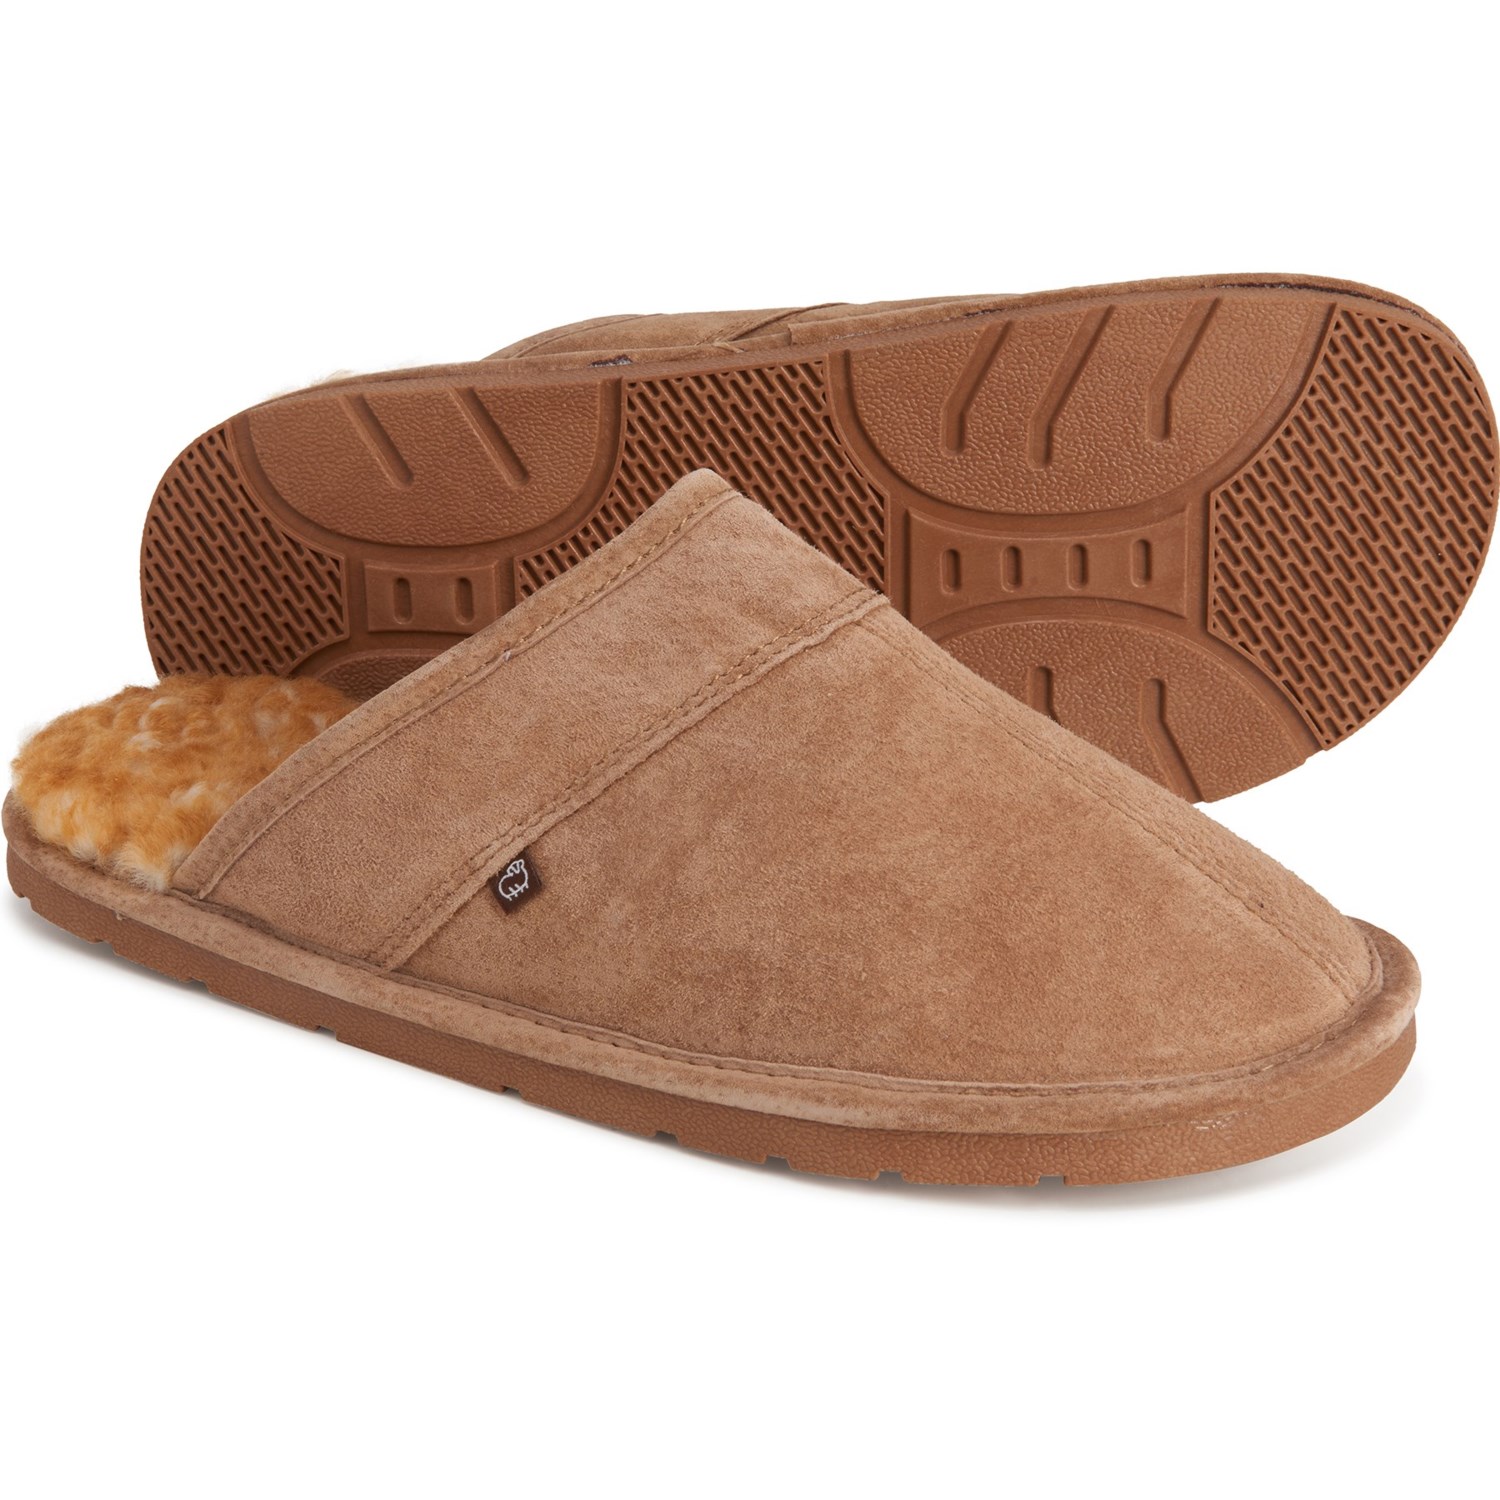 LAMO Footwear Tranquil Scuff Slippers (For Men) - Save 60%